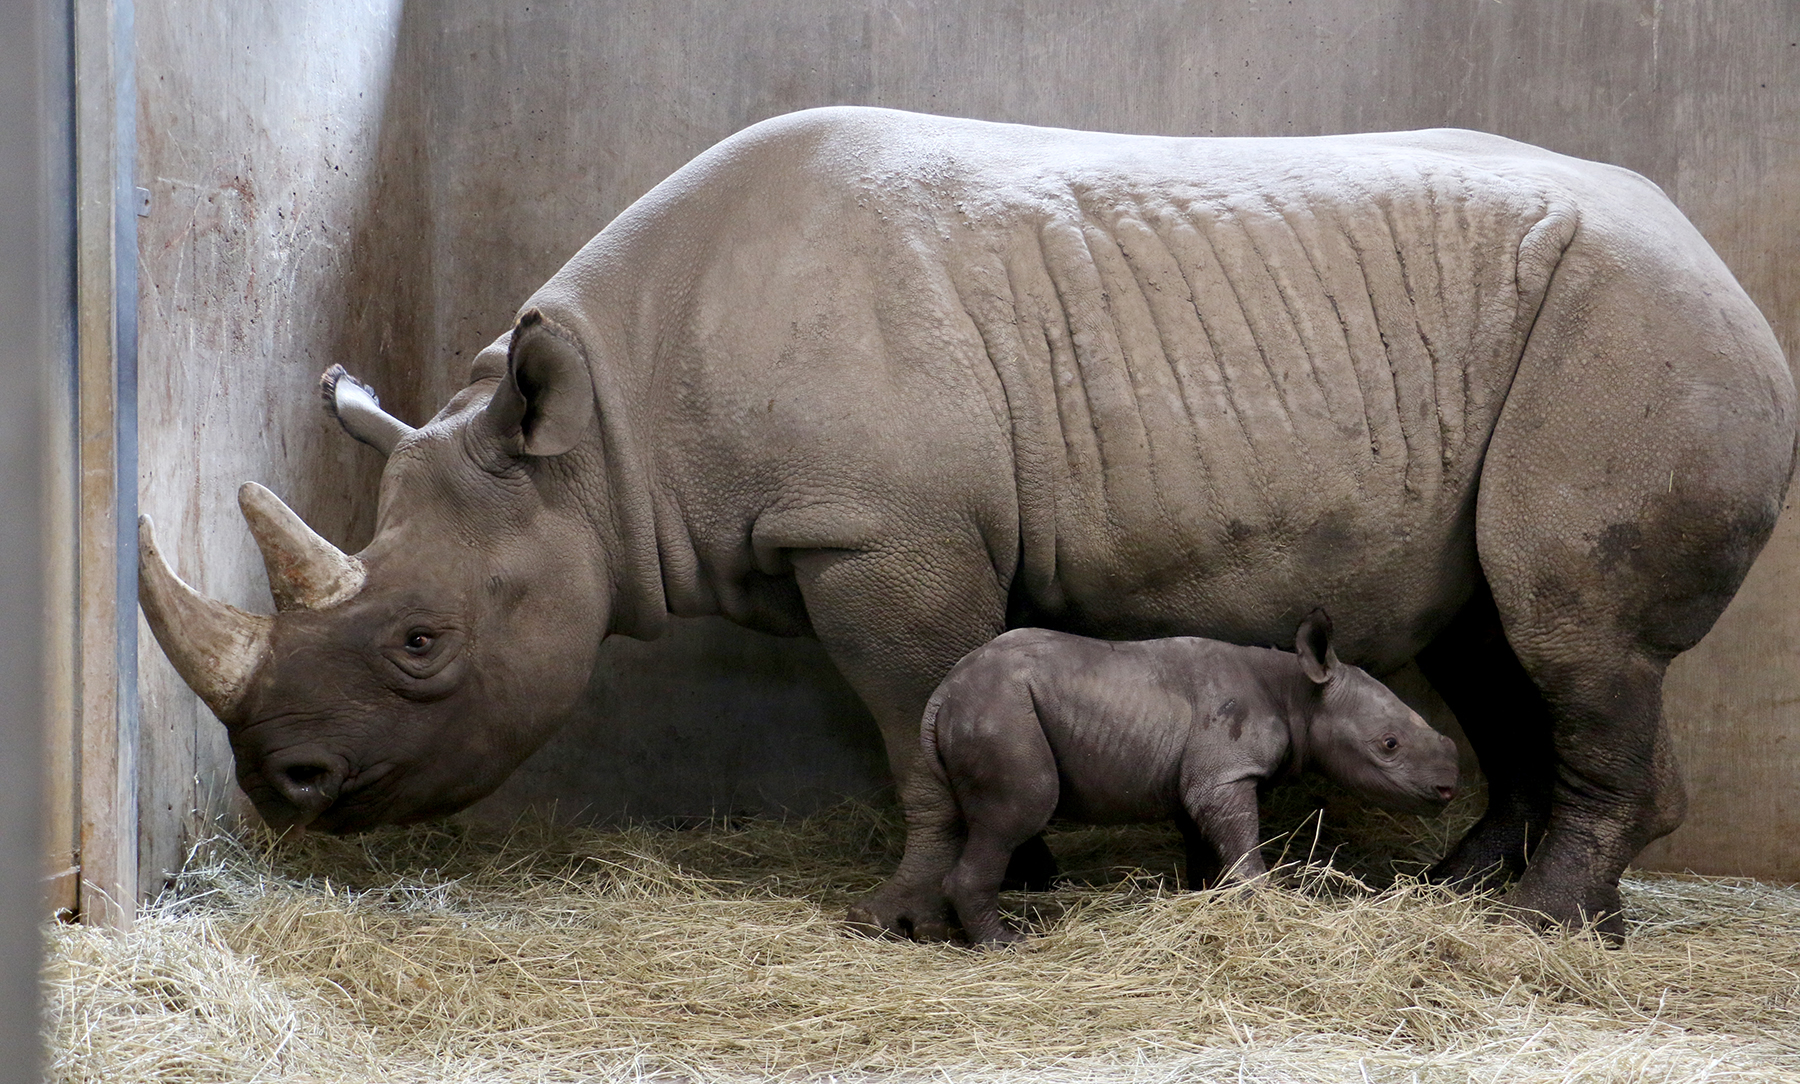 PHOTO: The Blank Park Zoo in Des Moines, Iowa welcomed a new baby rhino who was born on Oct. 11, 2016.